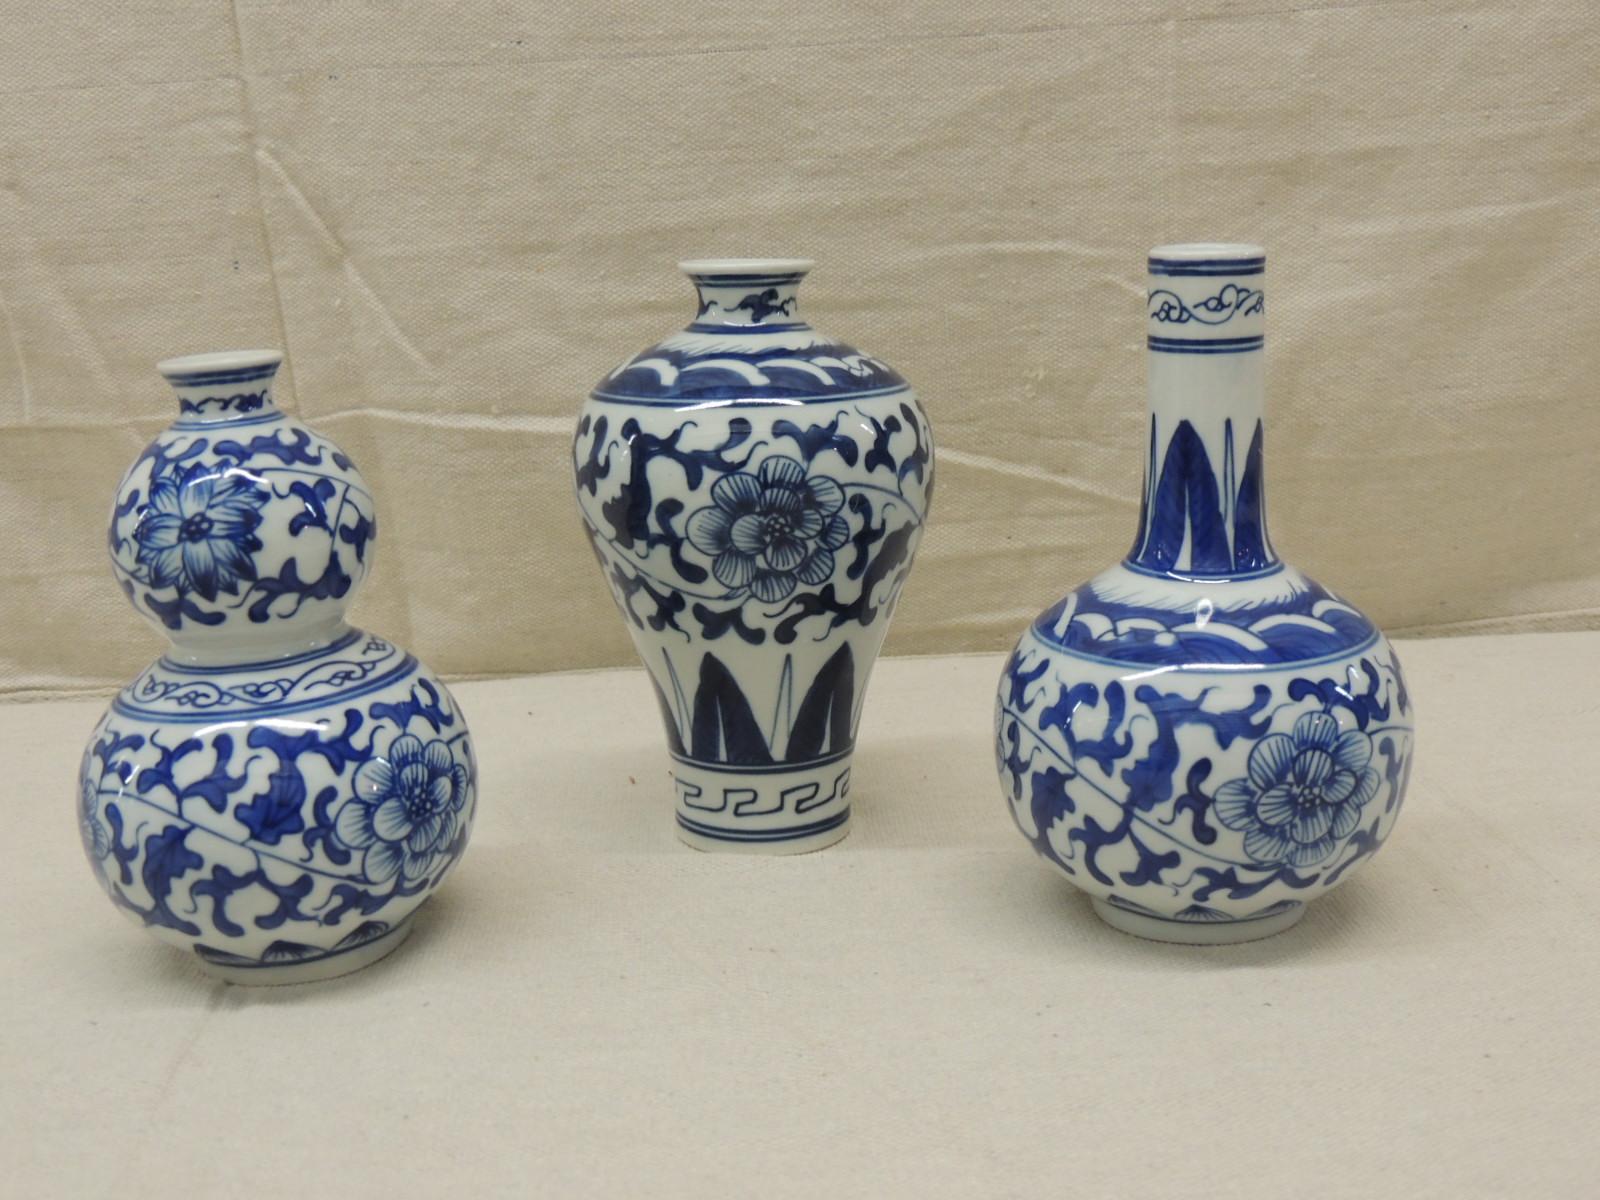 Set of (3) blue and white decorative vases.
Purchased from Gumps in the 1990s, San Francisco.
Size: 4